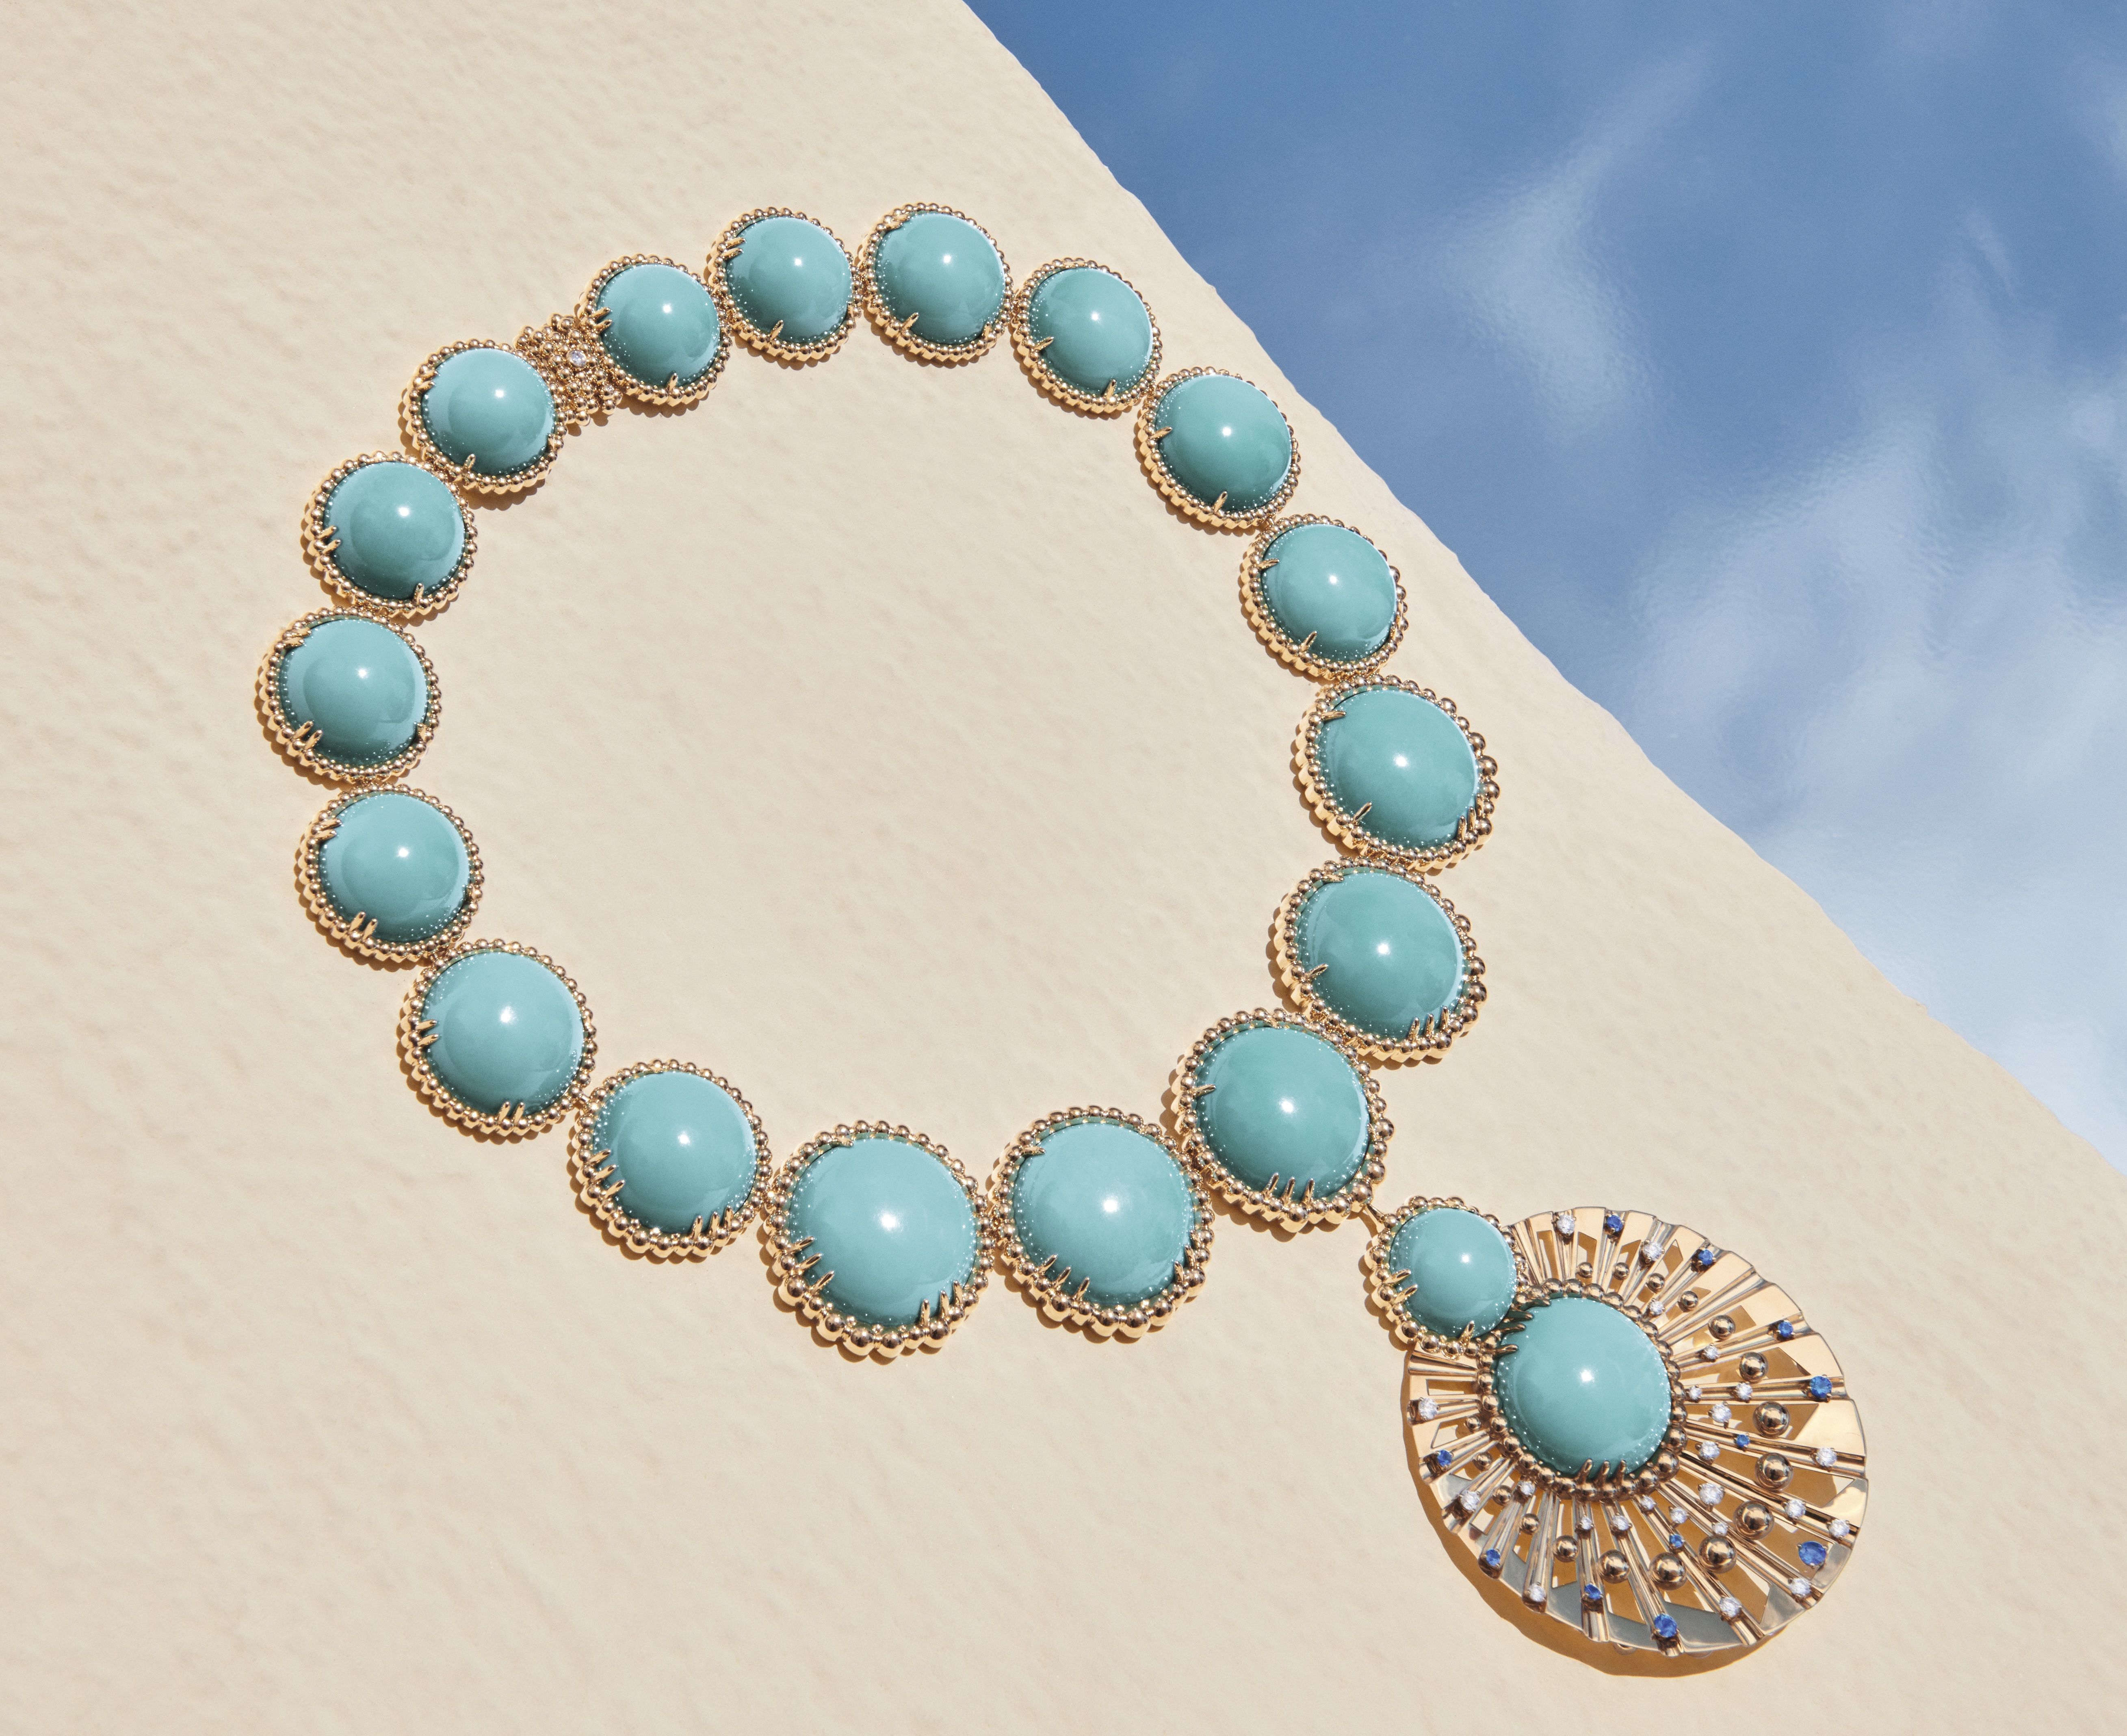 Van Cleef & Arpels Vintage Alhambra Turquoise Necklace - 18K Yellow Gold  Chain, Necklaces - VAC20392 | The RealReal